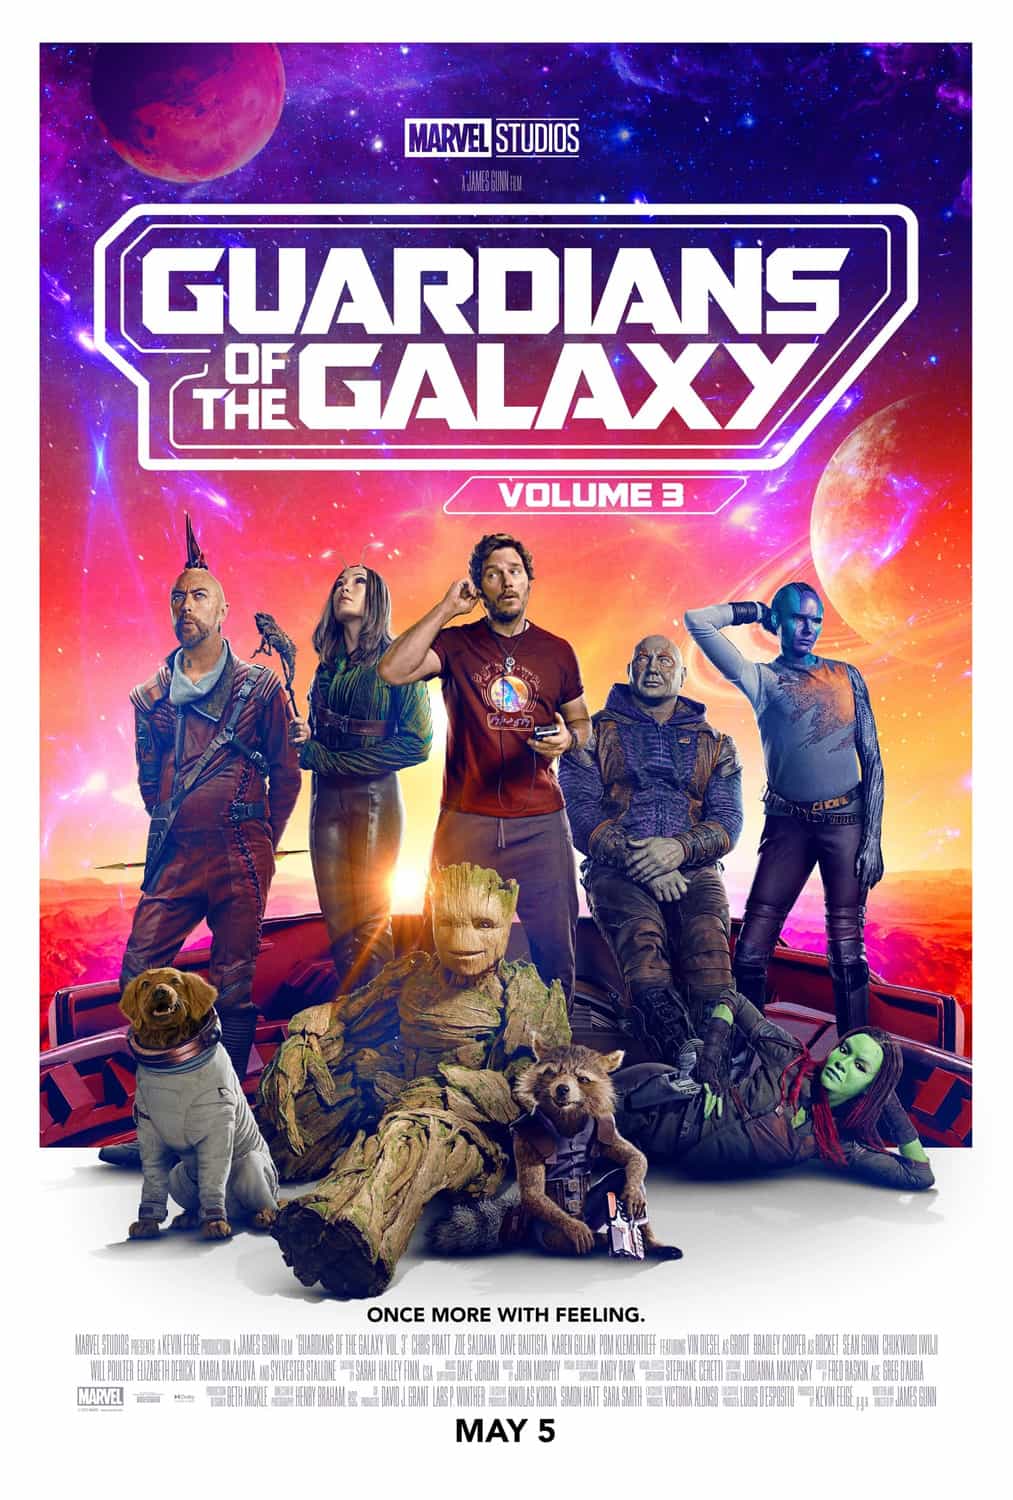 US Box Office Weekend Report 5th - 7th May 2023: Guardians of the Galaxy 3 makes its debut with $114 Million on the US box office